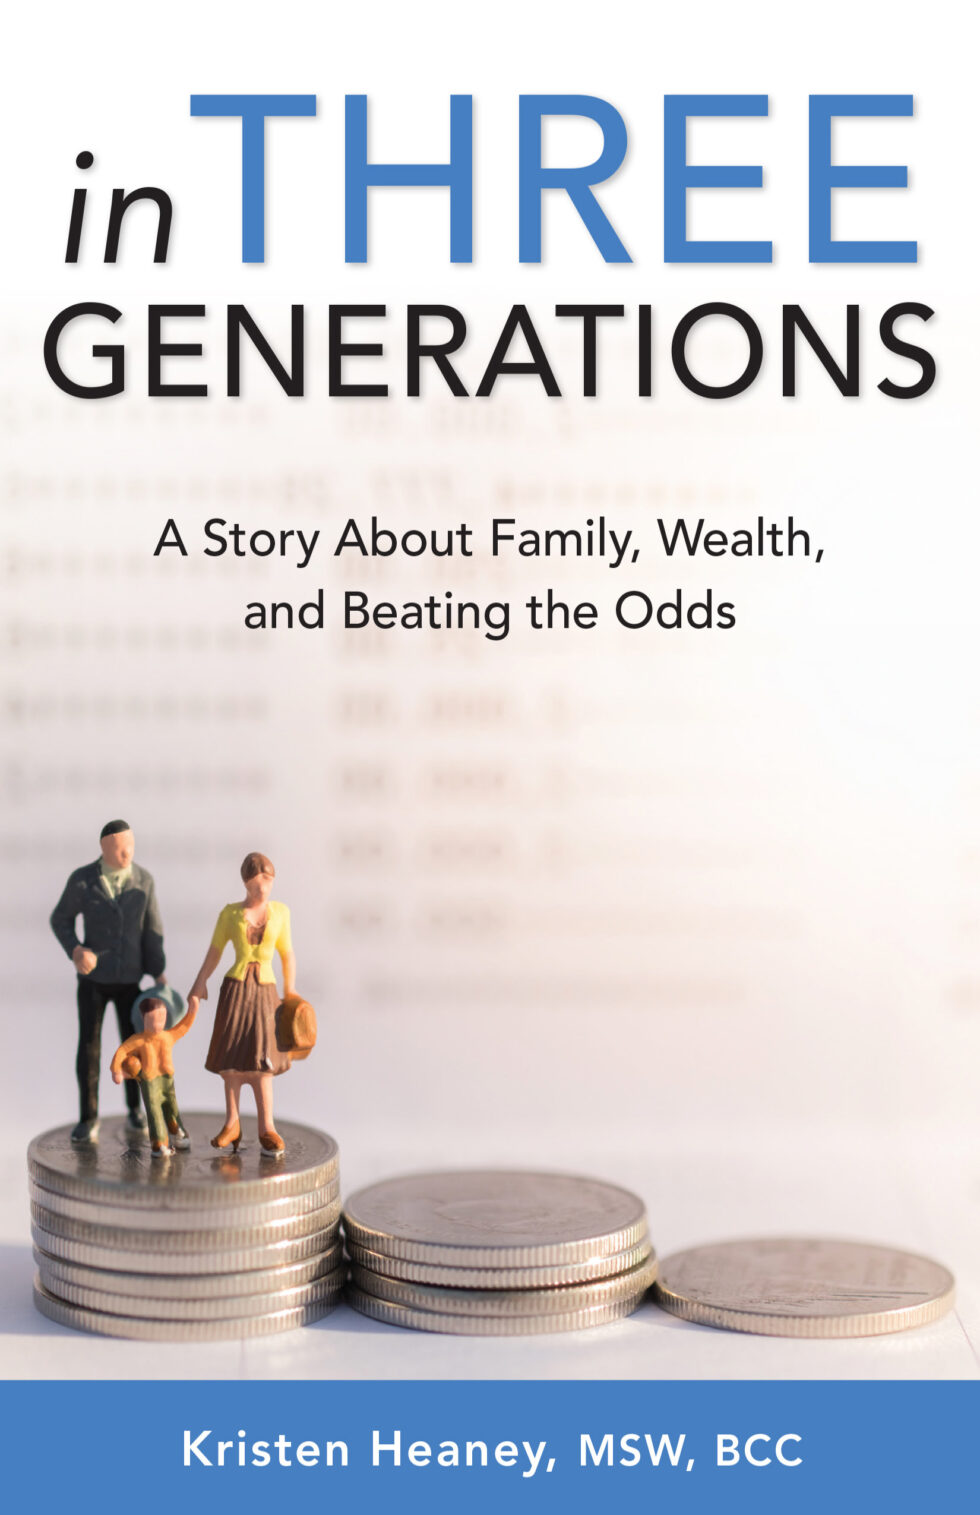 In Three Generations by Kristen Heaney, MSW, BCC